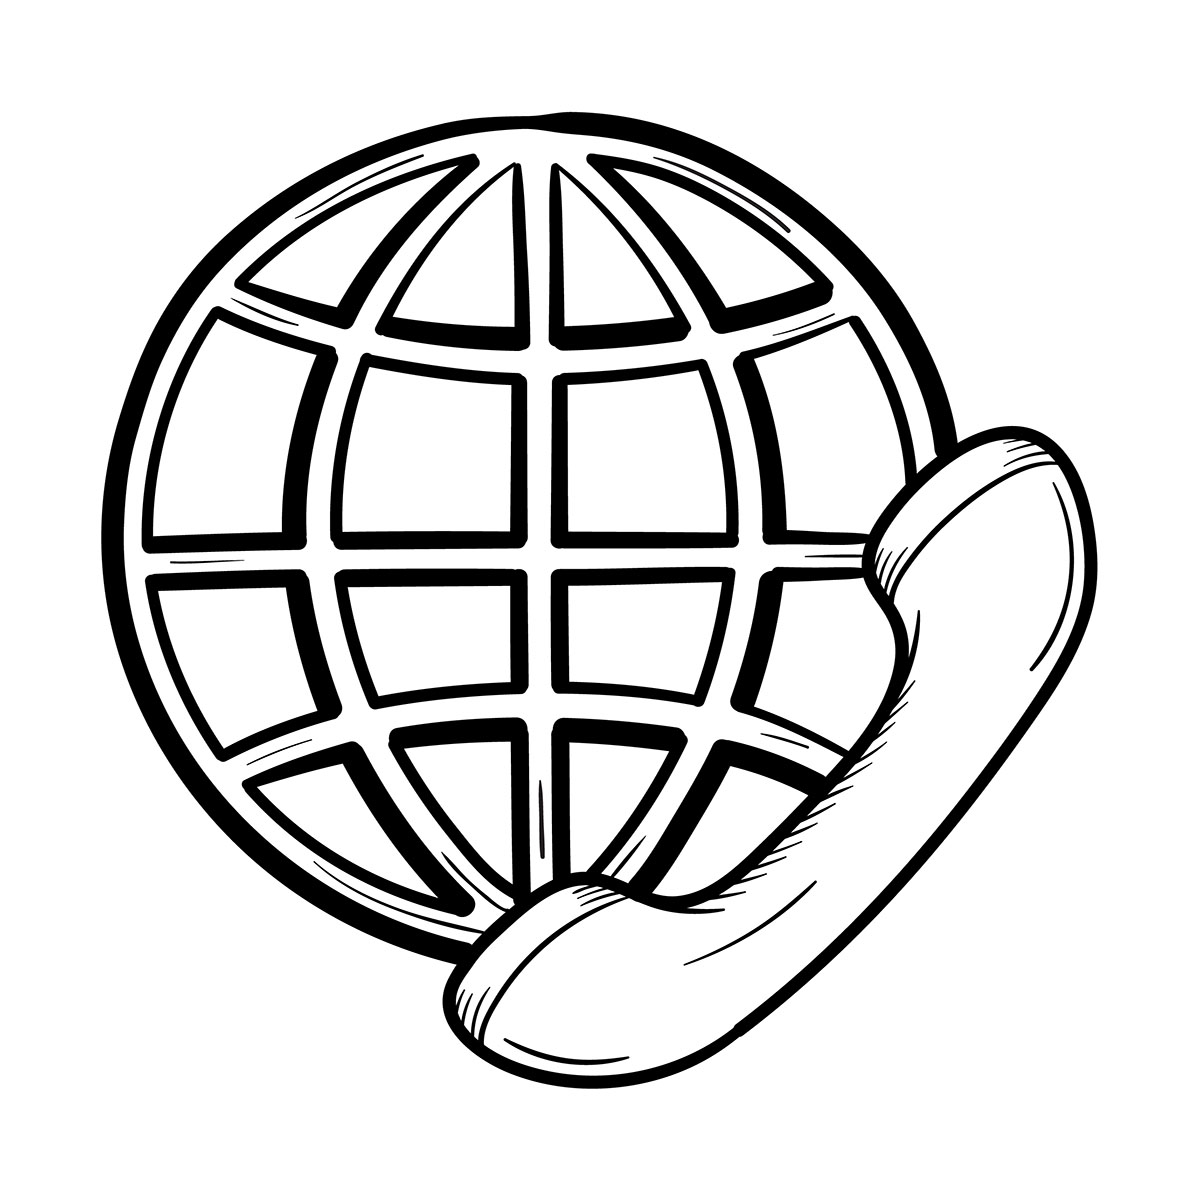 Globe and Phone Receiver Black and White Line Illustration